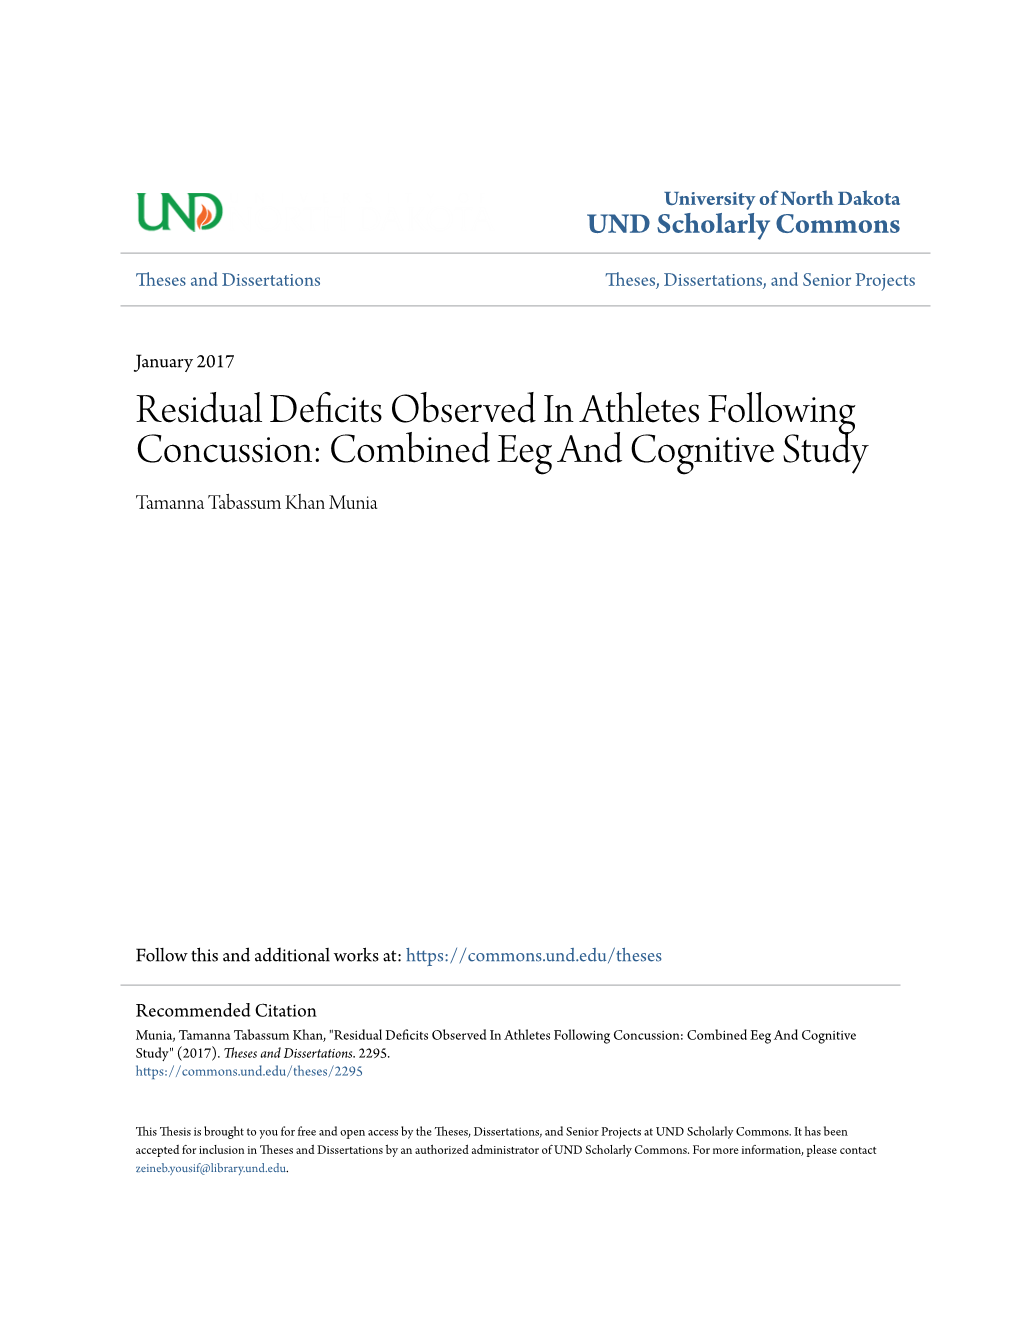 Residual Deficits Observed in Athletes Following Concussion: Combined Eeg and Cognitive Study Tamanna Tabassum Khan Munia